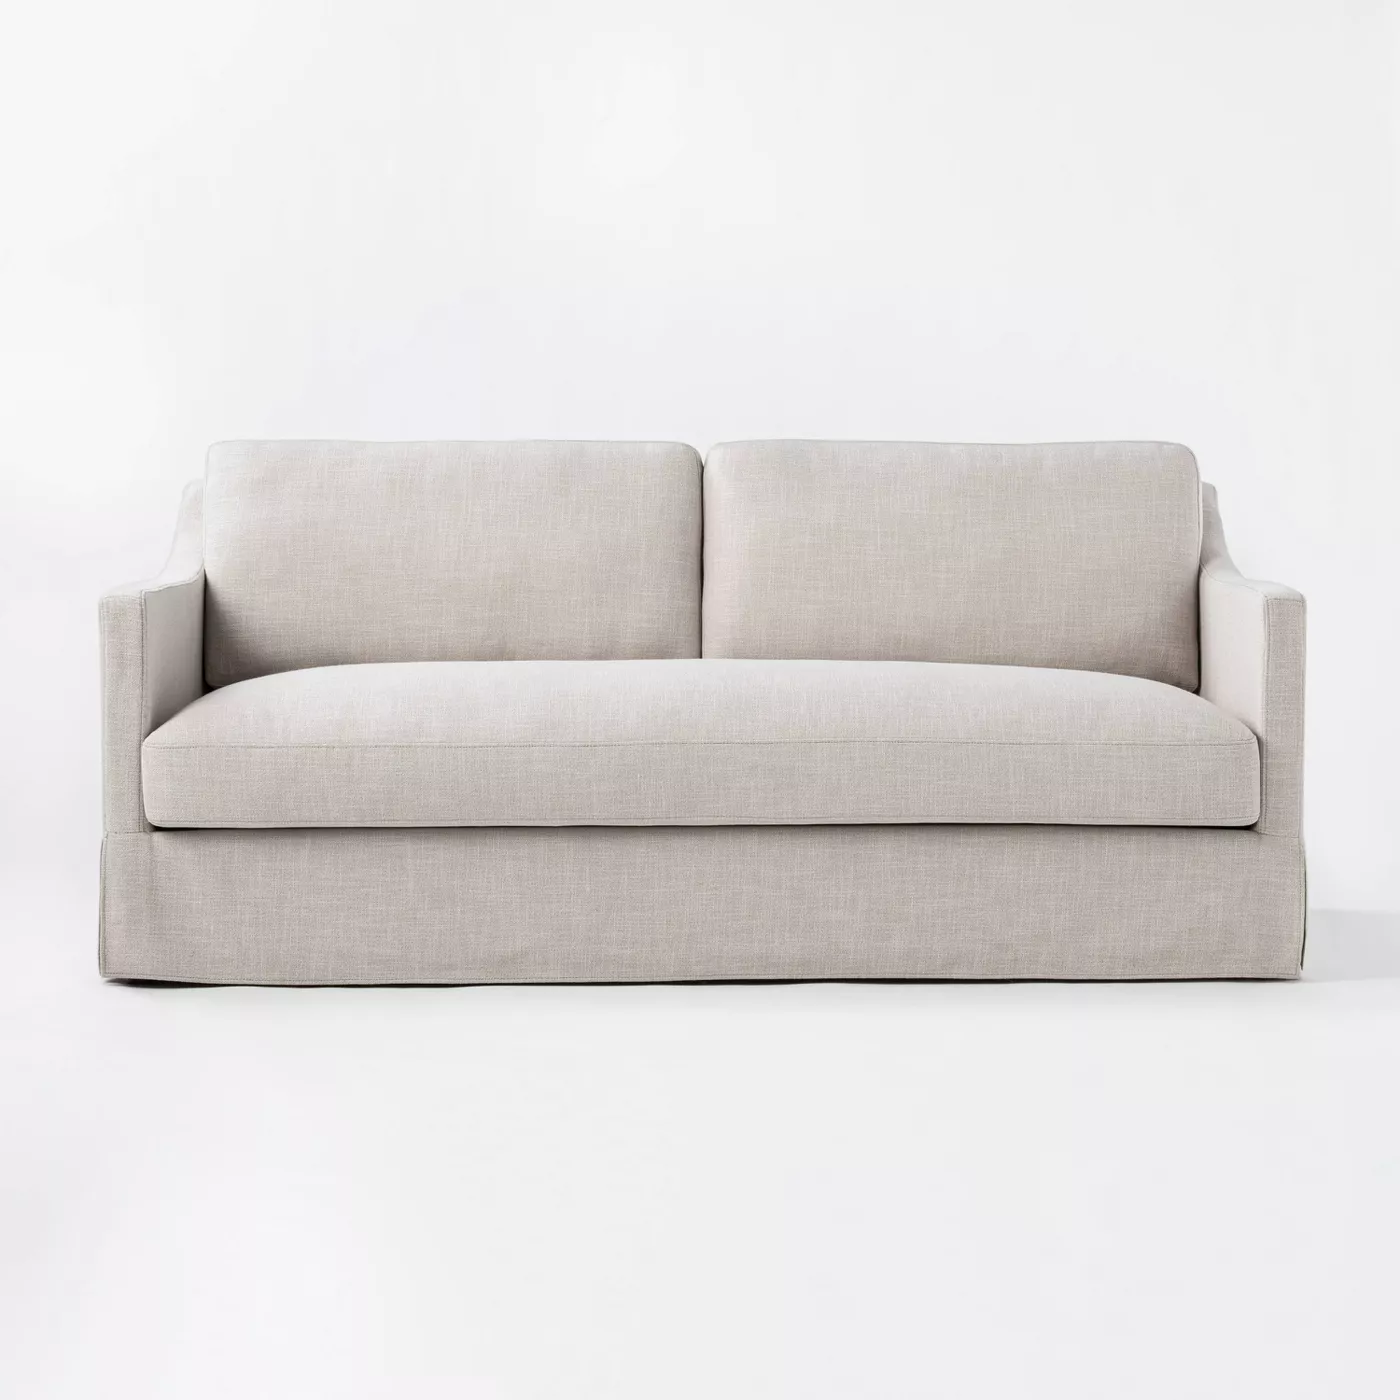 Vivian Park Upholstered Sofa - Threshold™ designed with Studio McGee - image 3 of 7